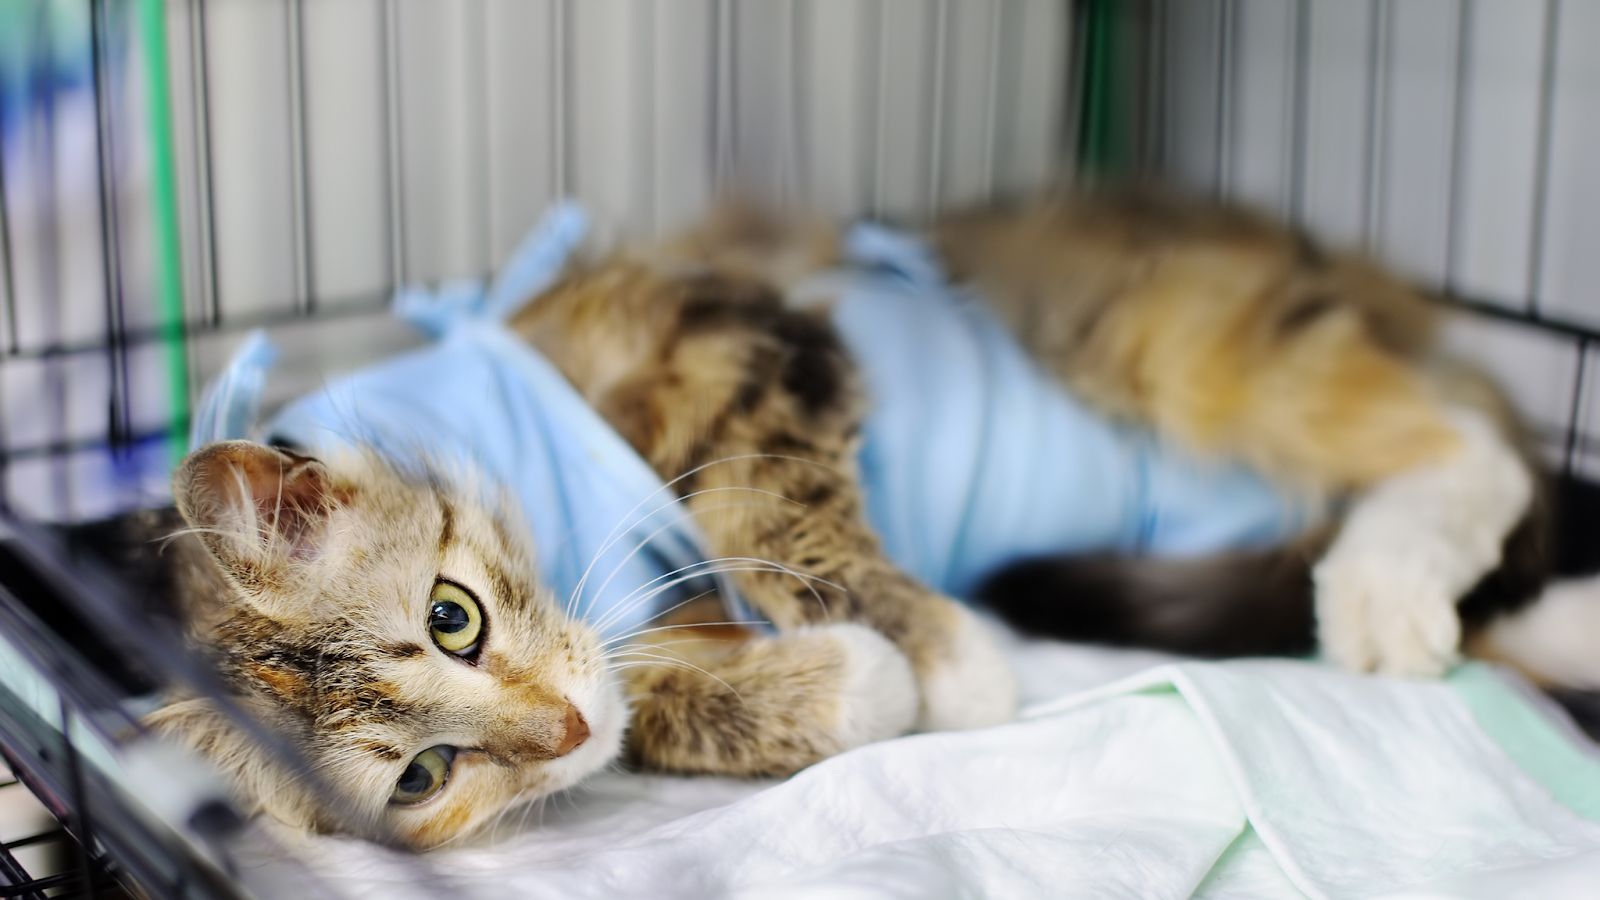 Treatment for cat wounds varies based on the lesion and the location.